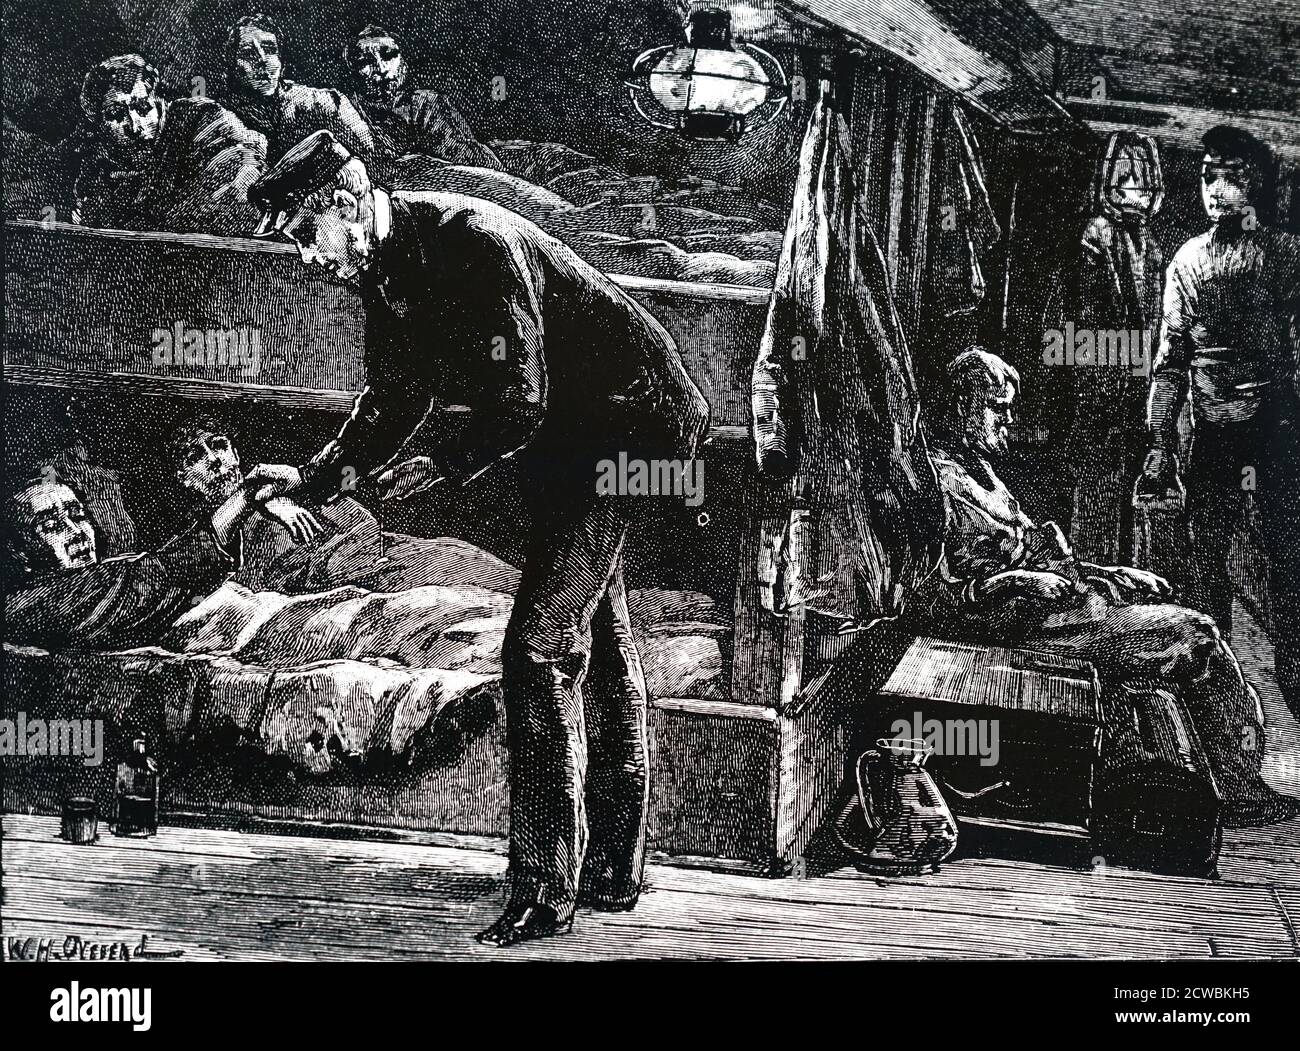 Engraving depicting a scene onboard an Irish emigrant ship bound for North America during the potato famine of the 1840s. The emigrants were so weakened by starvation that epidemics swept through the cramped quarters and the mortality rate was high. Stock Photo